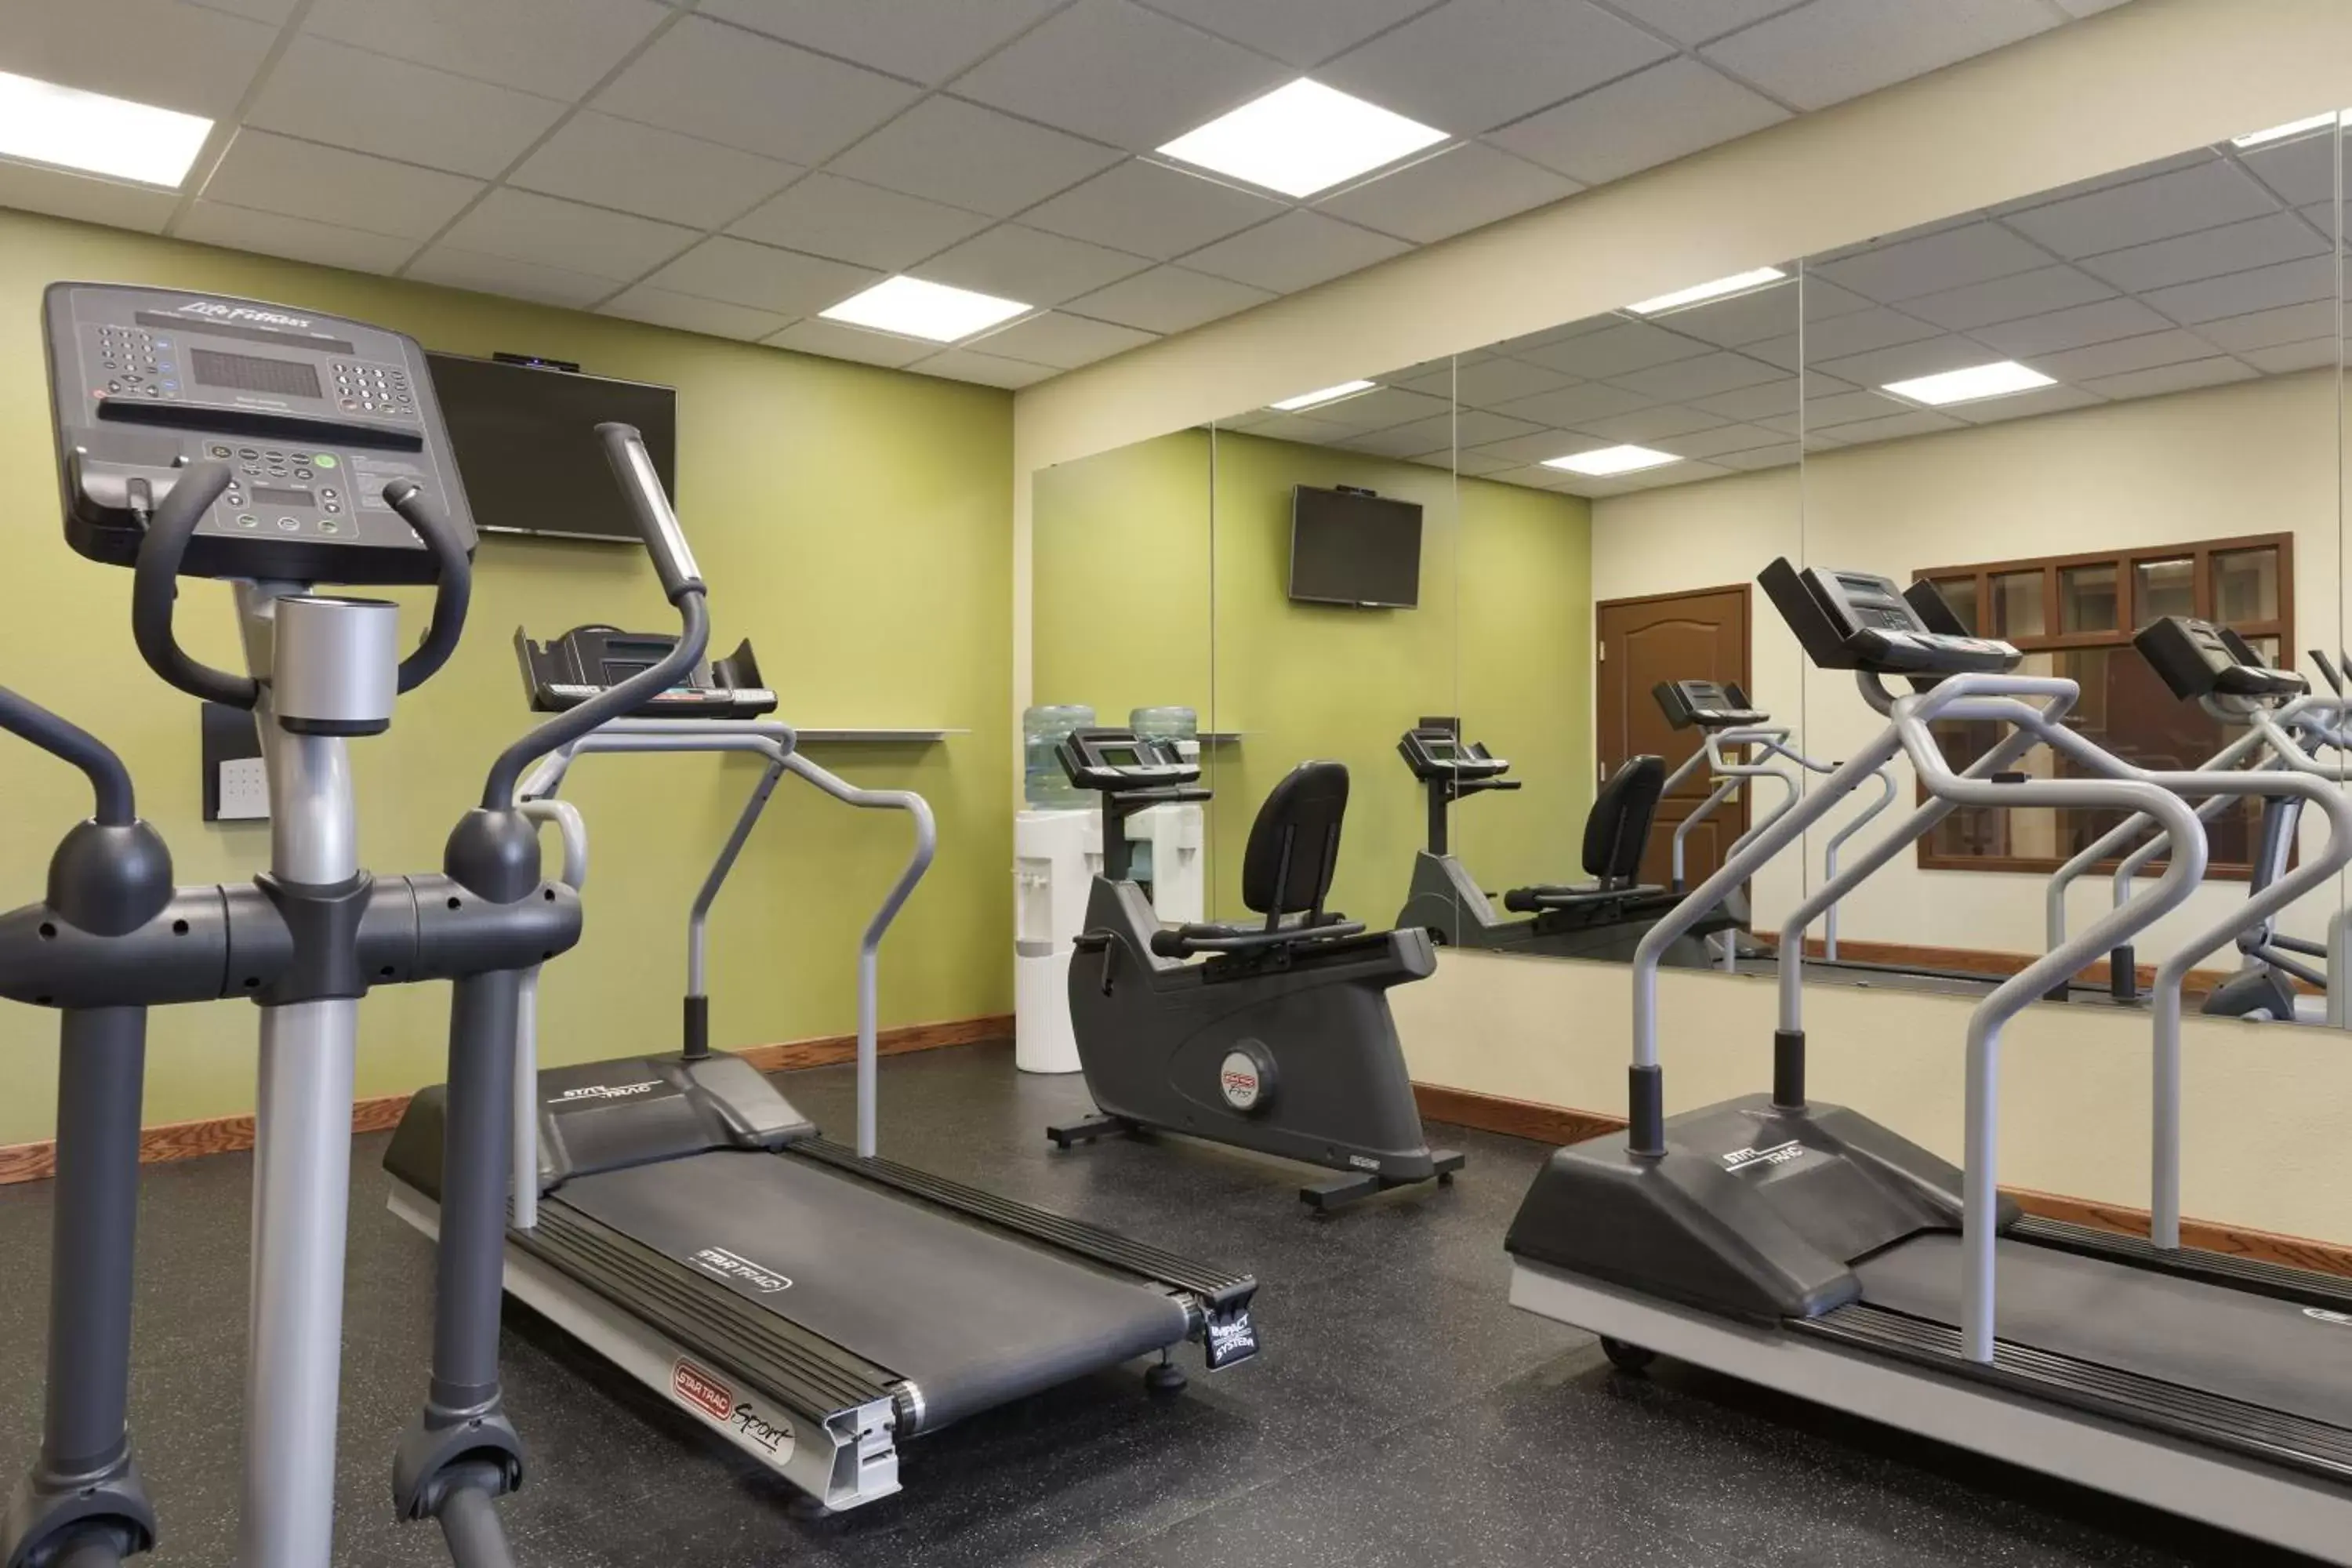 Fitness centre/facilities, Fitness Center/Facilities in Country Inn & Suites by Radisson, Billings, MT